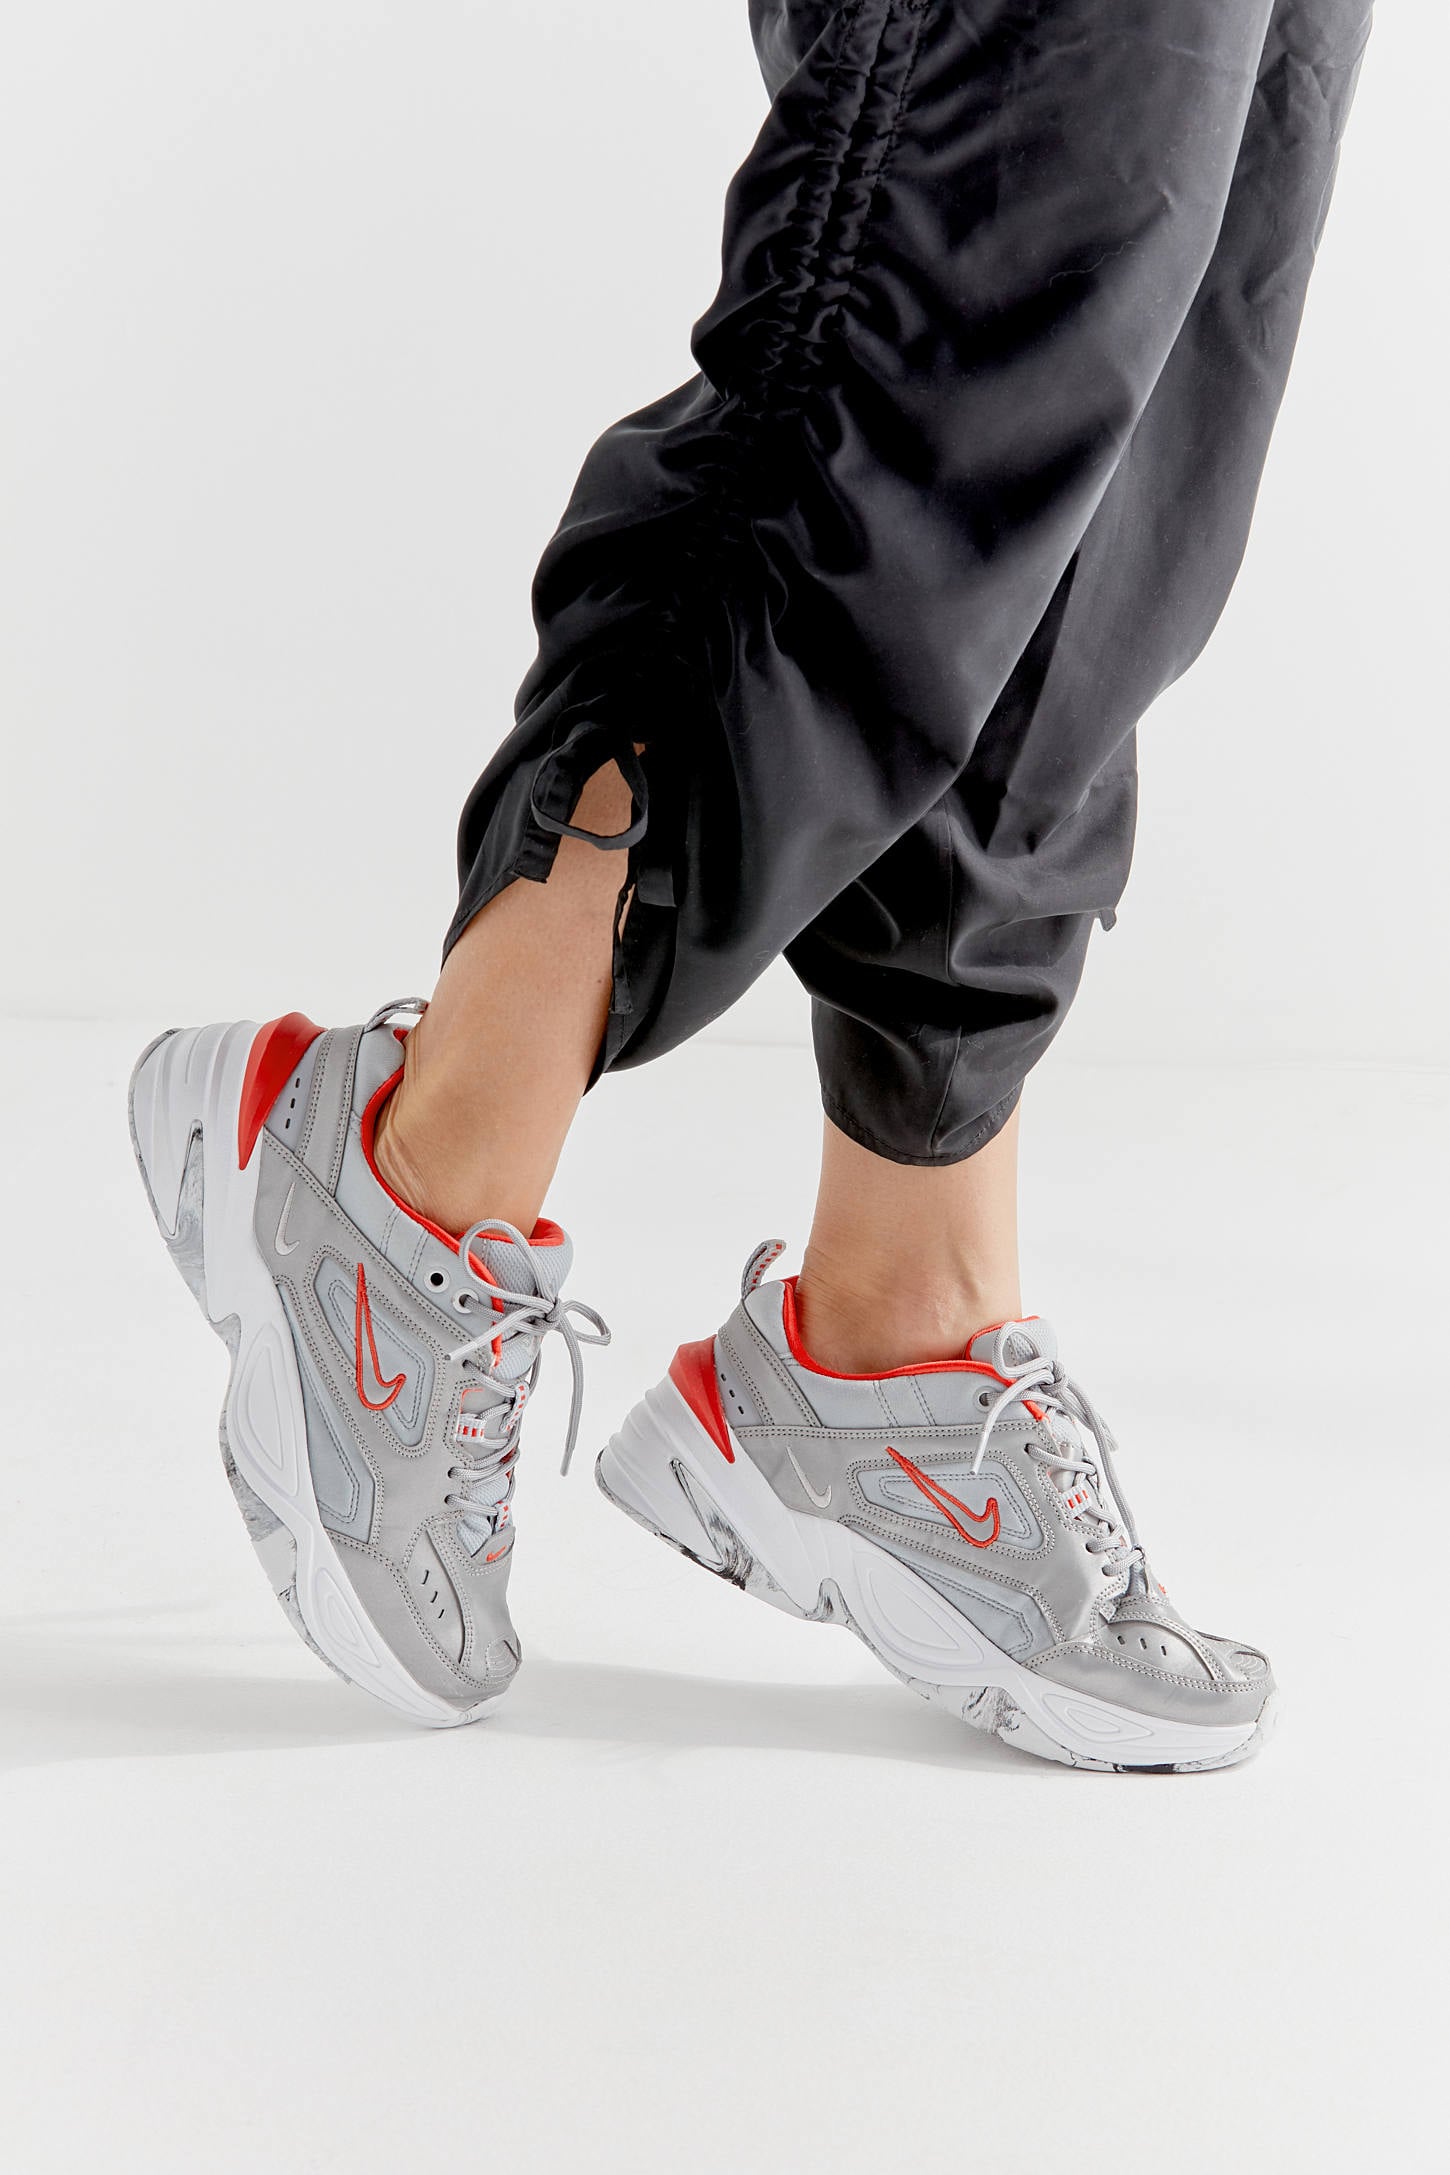 Suposiciones, suposiciones. Adivinar Rey Lear Elemental Nike M2K Tekno Metallic Sneakers | I Resisted Dad Sneakers For 1 Year, but  This $100 Pair Changed My Mind | POPSUGAR Fashion Photo 6